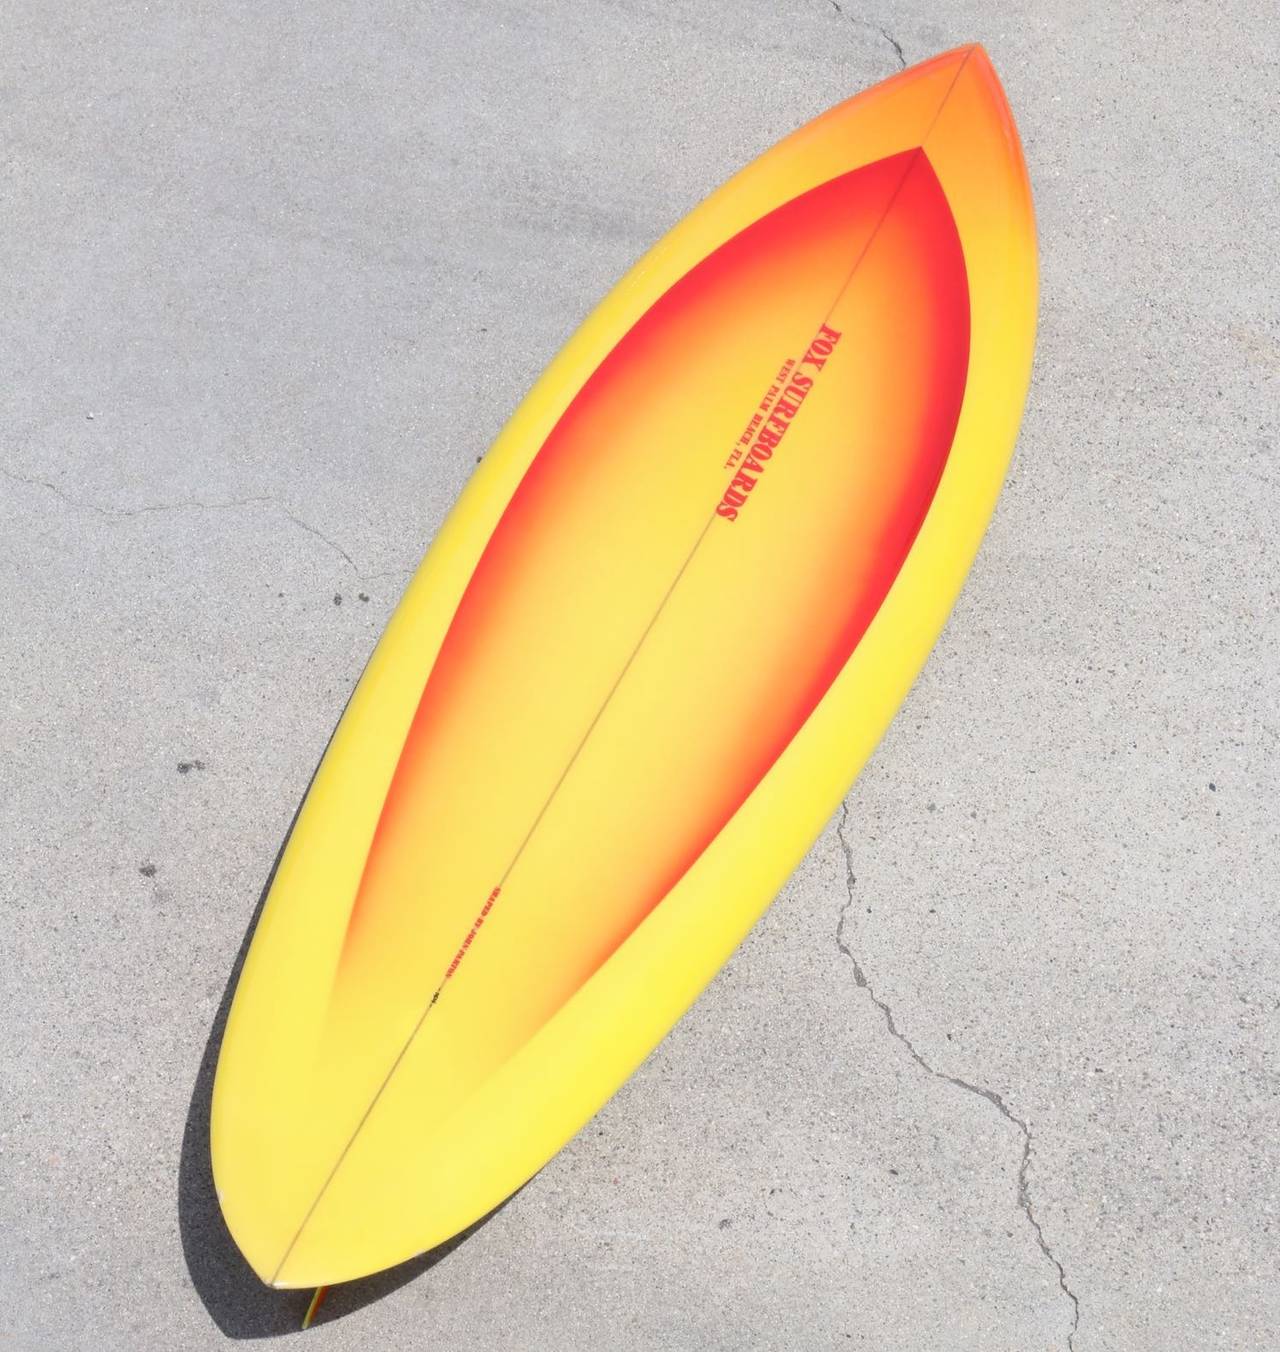 Vibrant orange fades to bright sun-kissed yellow on this energetic 1970s fox surfboard, masterfully shaped in the 